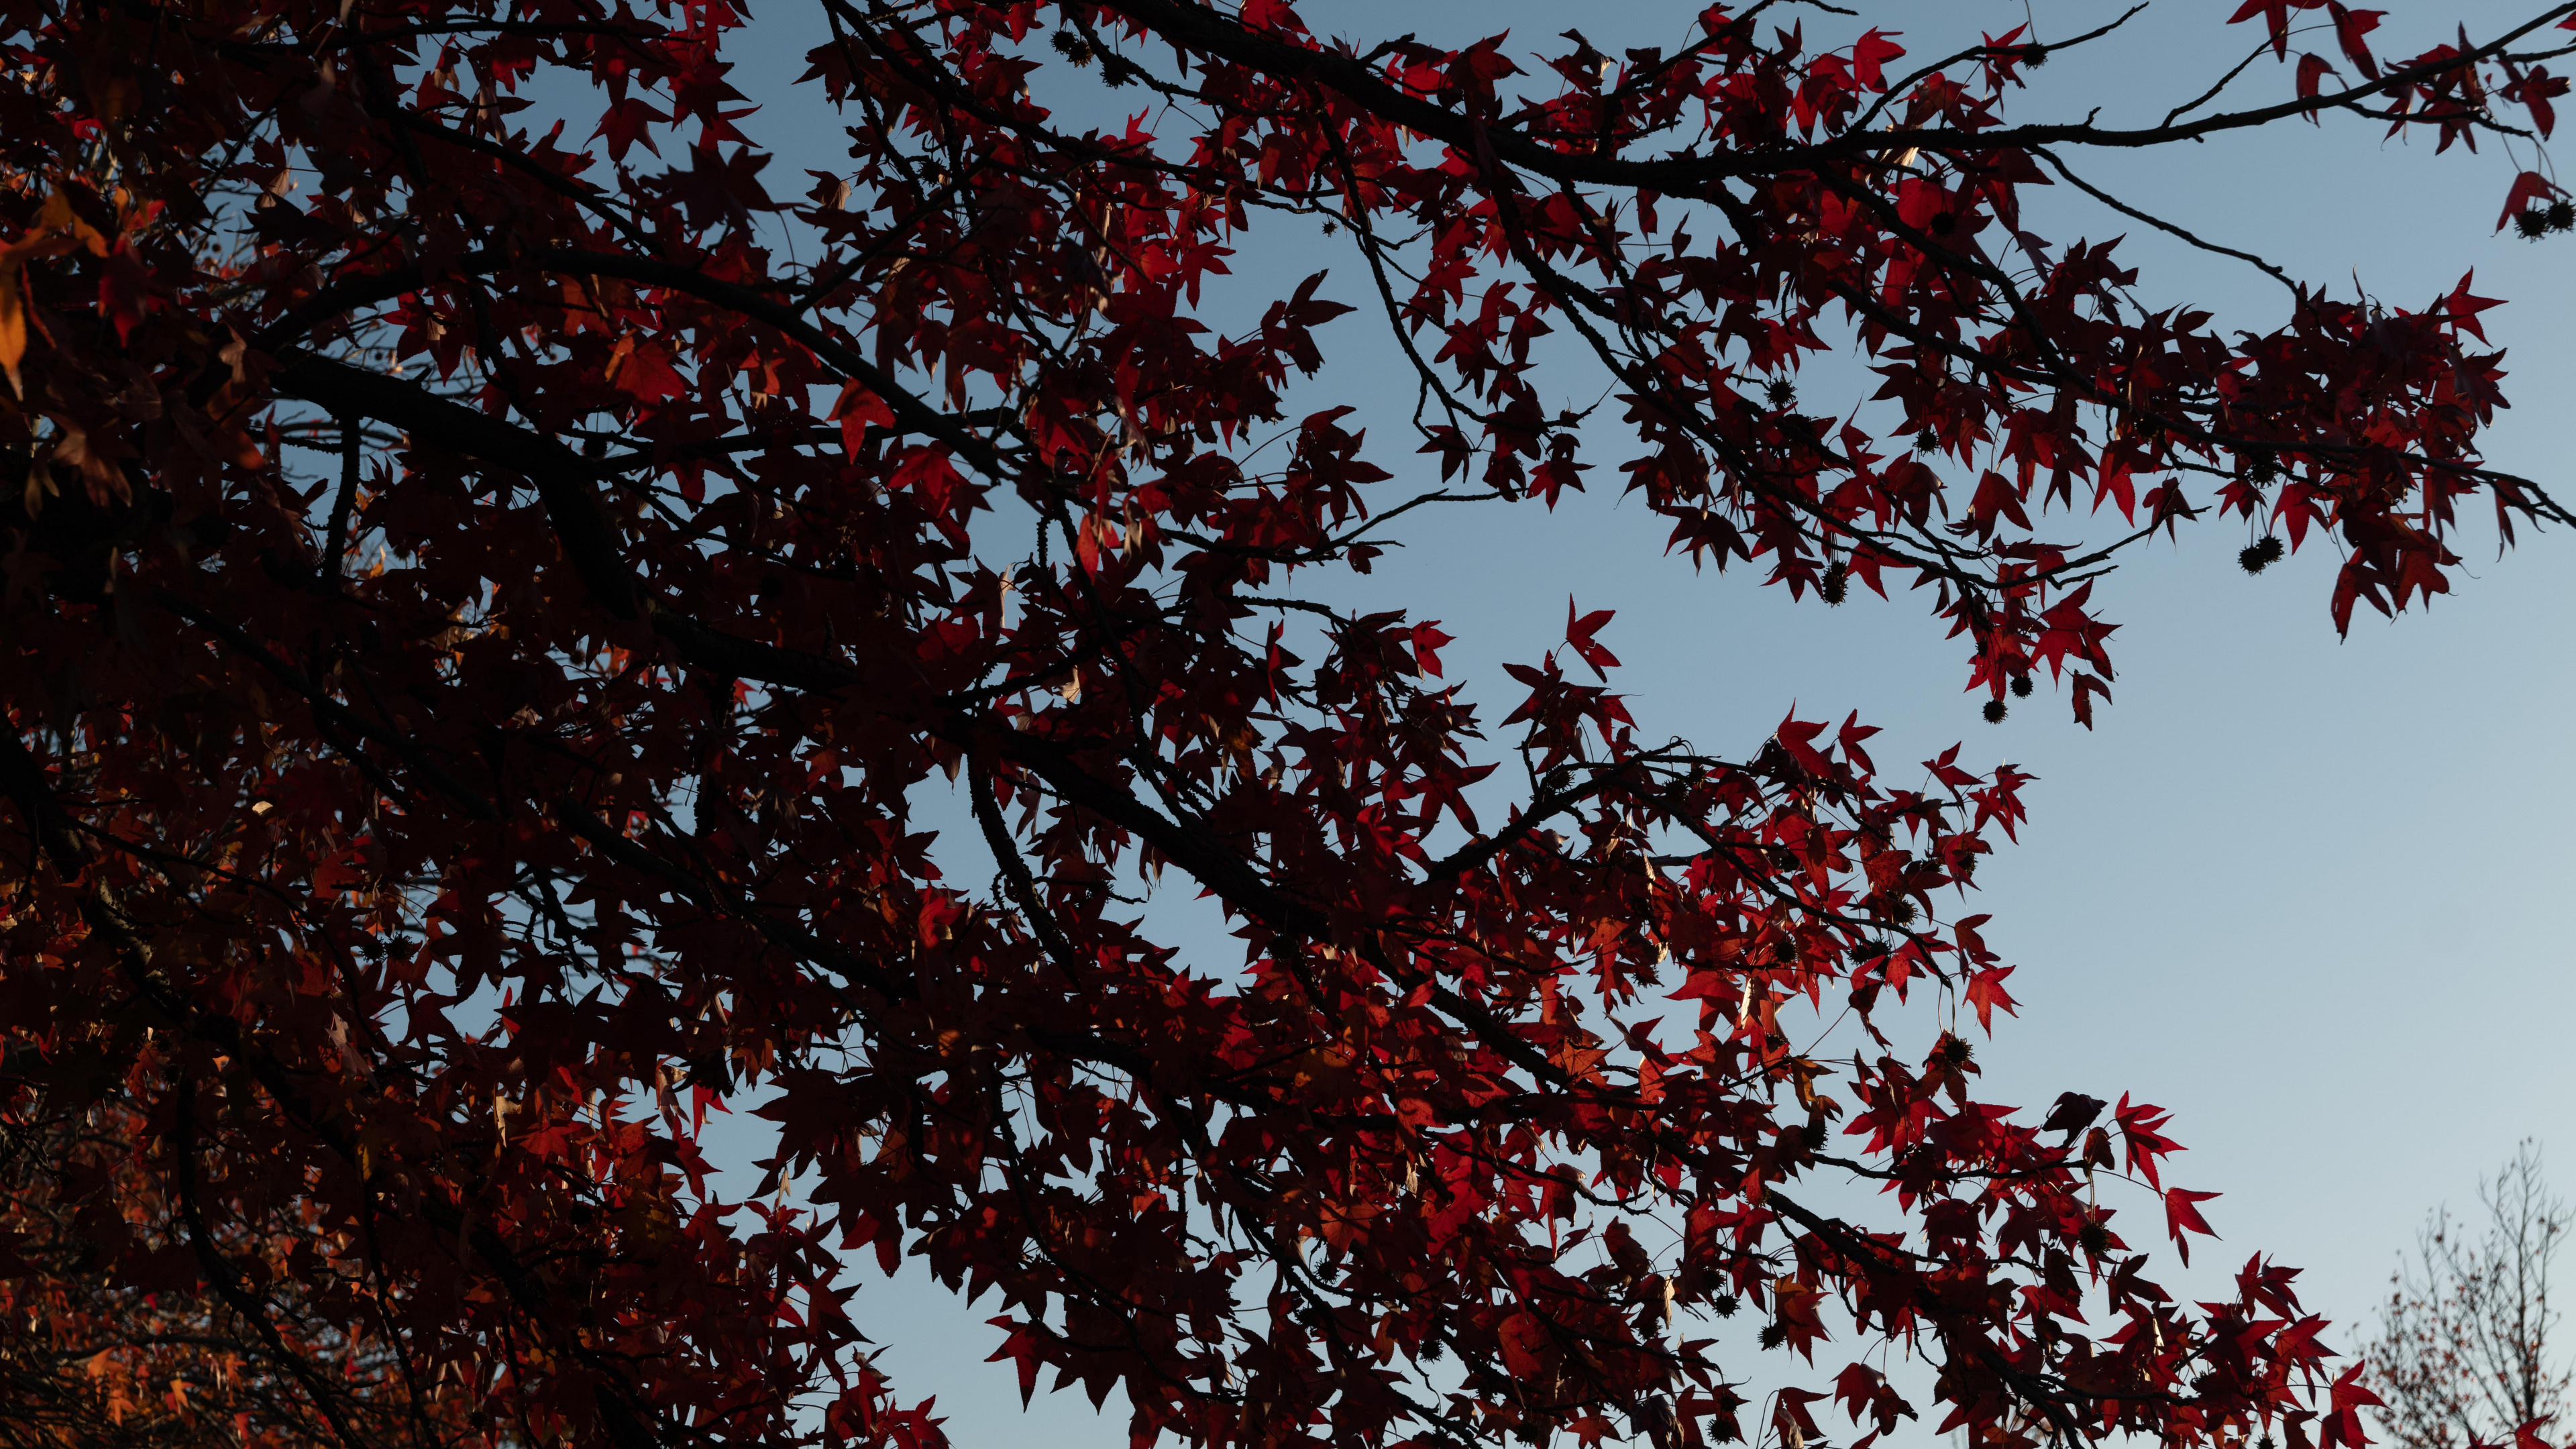 Maple tree branches, Leaves red, High definition fullscreen, Widescreen, 3840x2160 4K Desktop